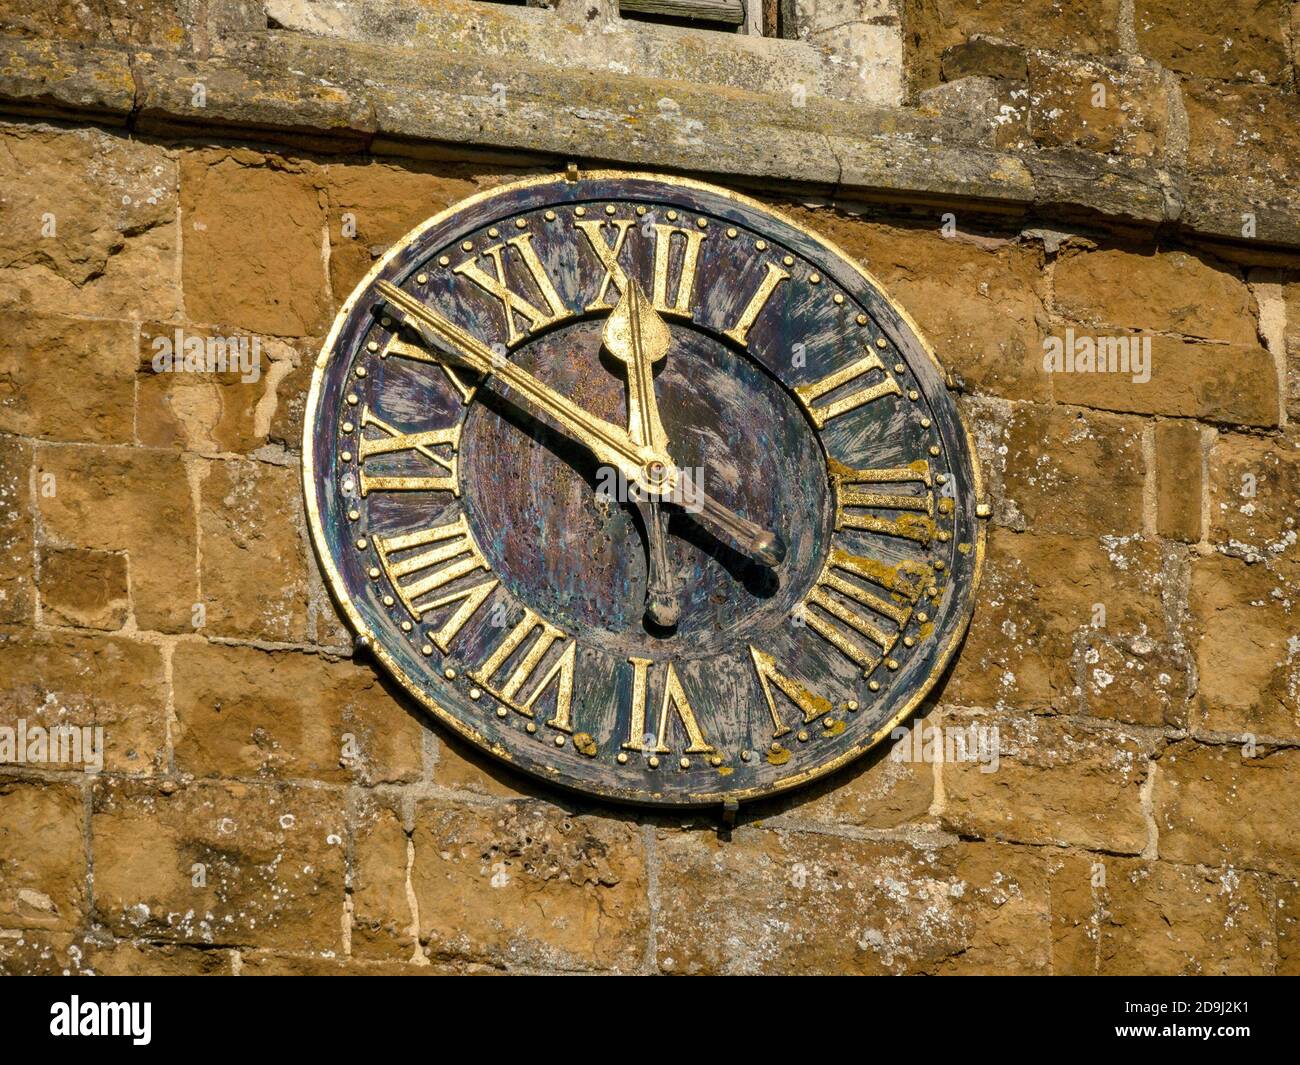 Church clock, St. Peter's Church in the village of Knossington, Leicestershire, England, UK Stock Photo